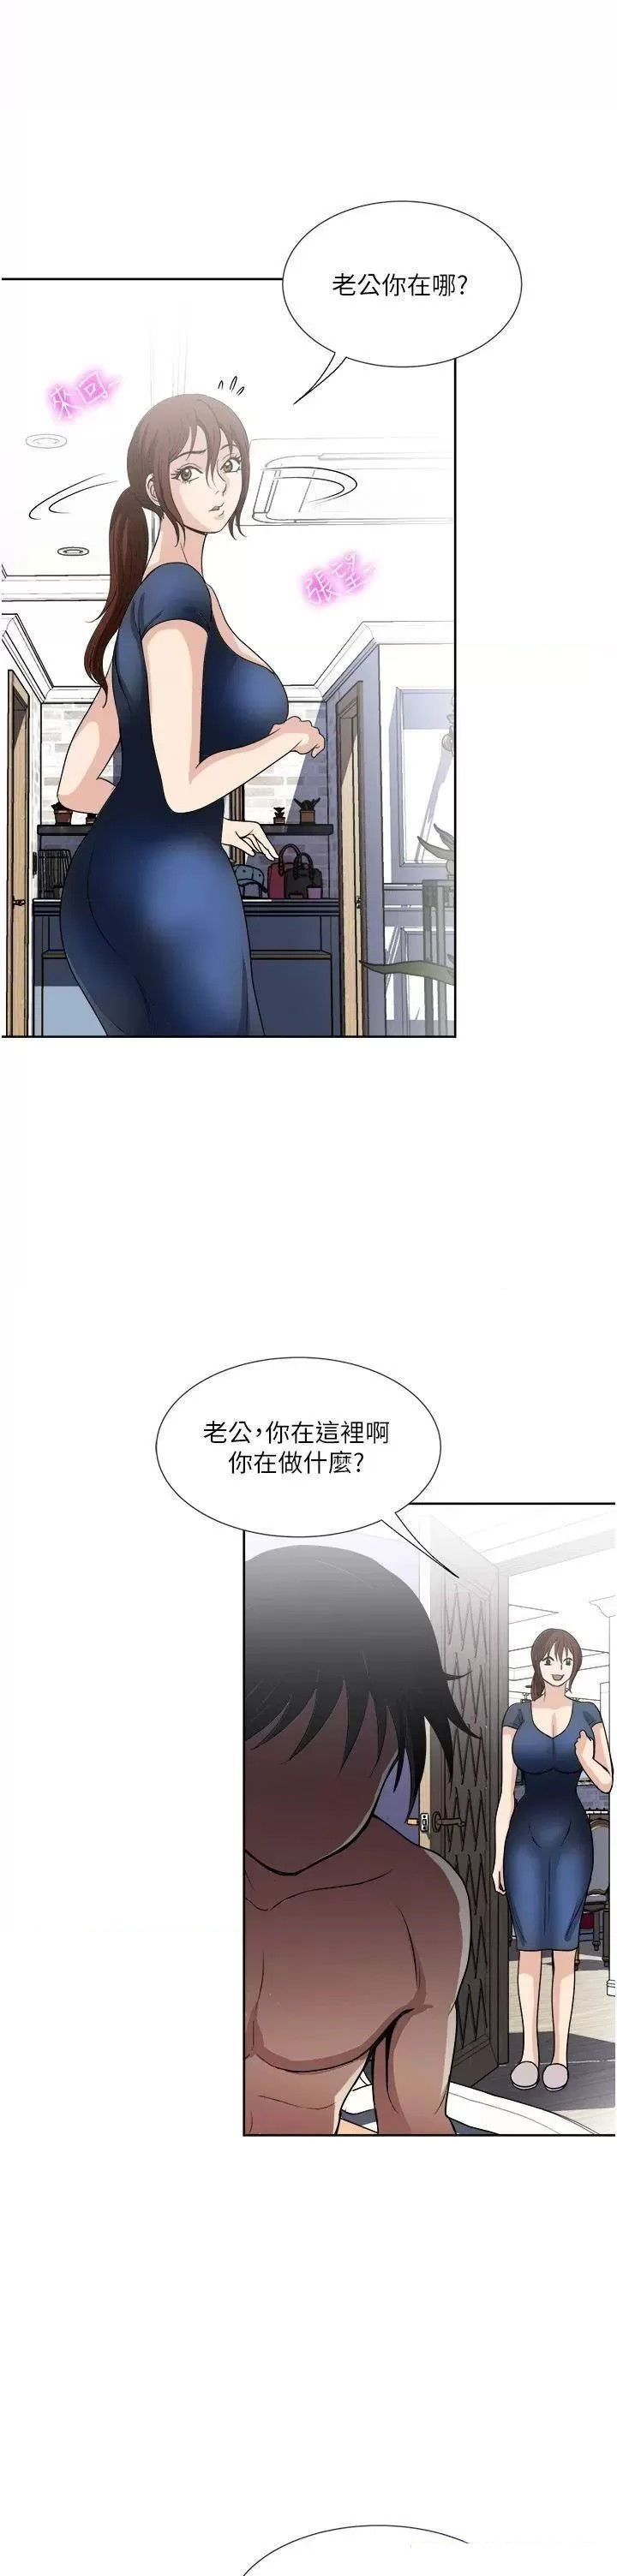 just-once-raw-chap-25-34